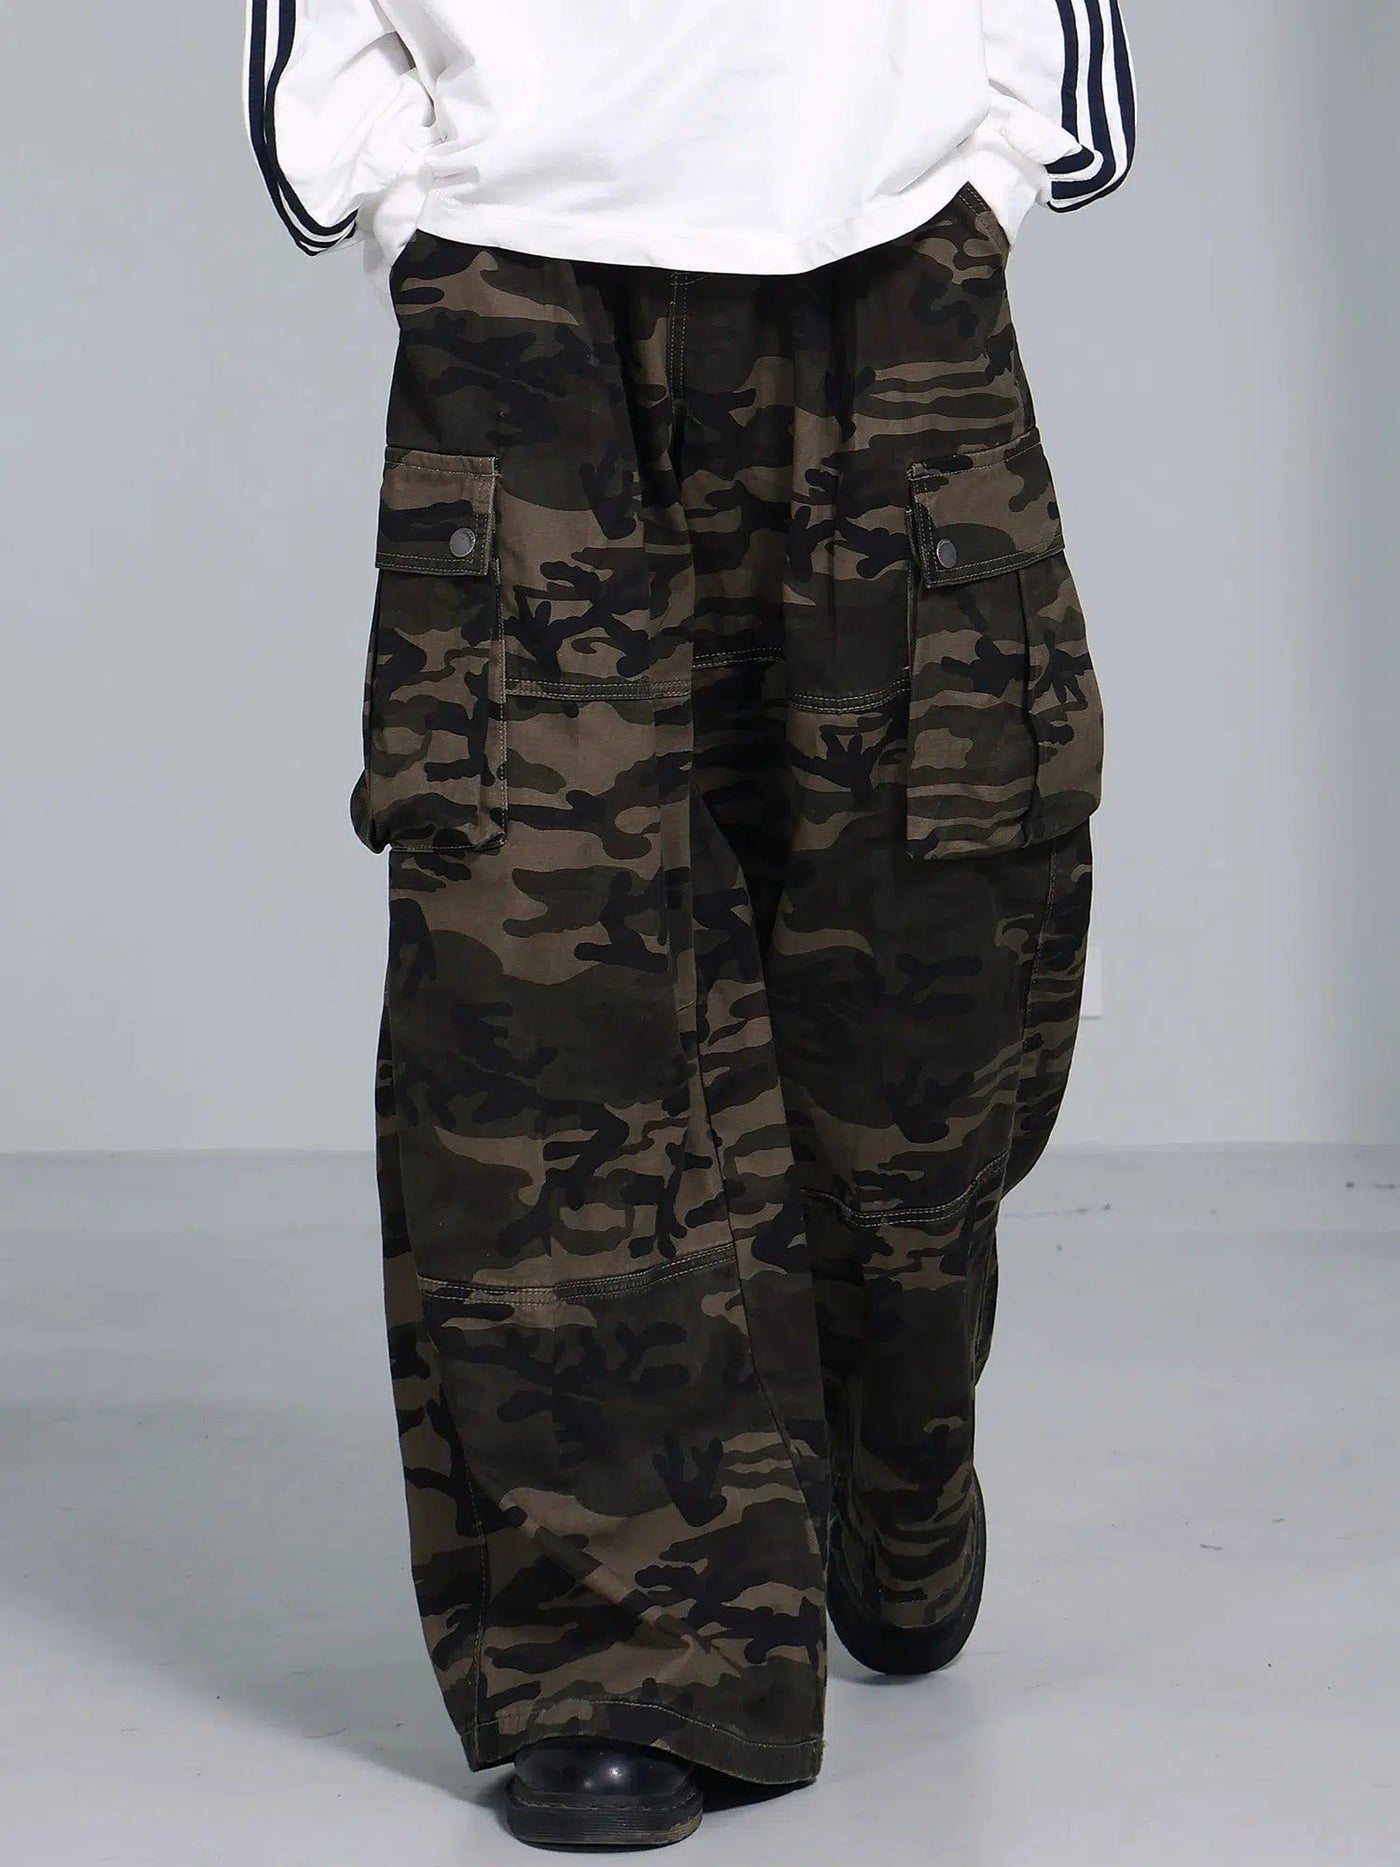 Wide Camouflage Cargo Pants Korean Street Fashion Pants By Jump Next Shop Online at OH Vault